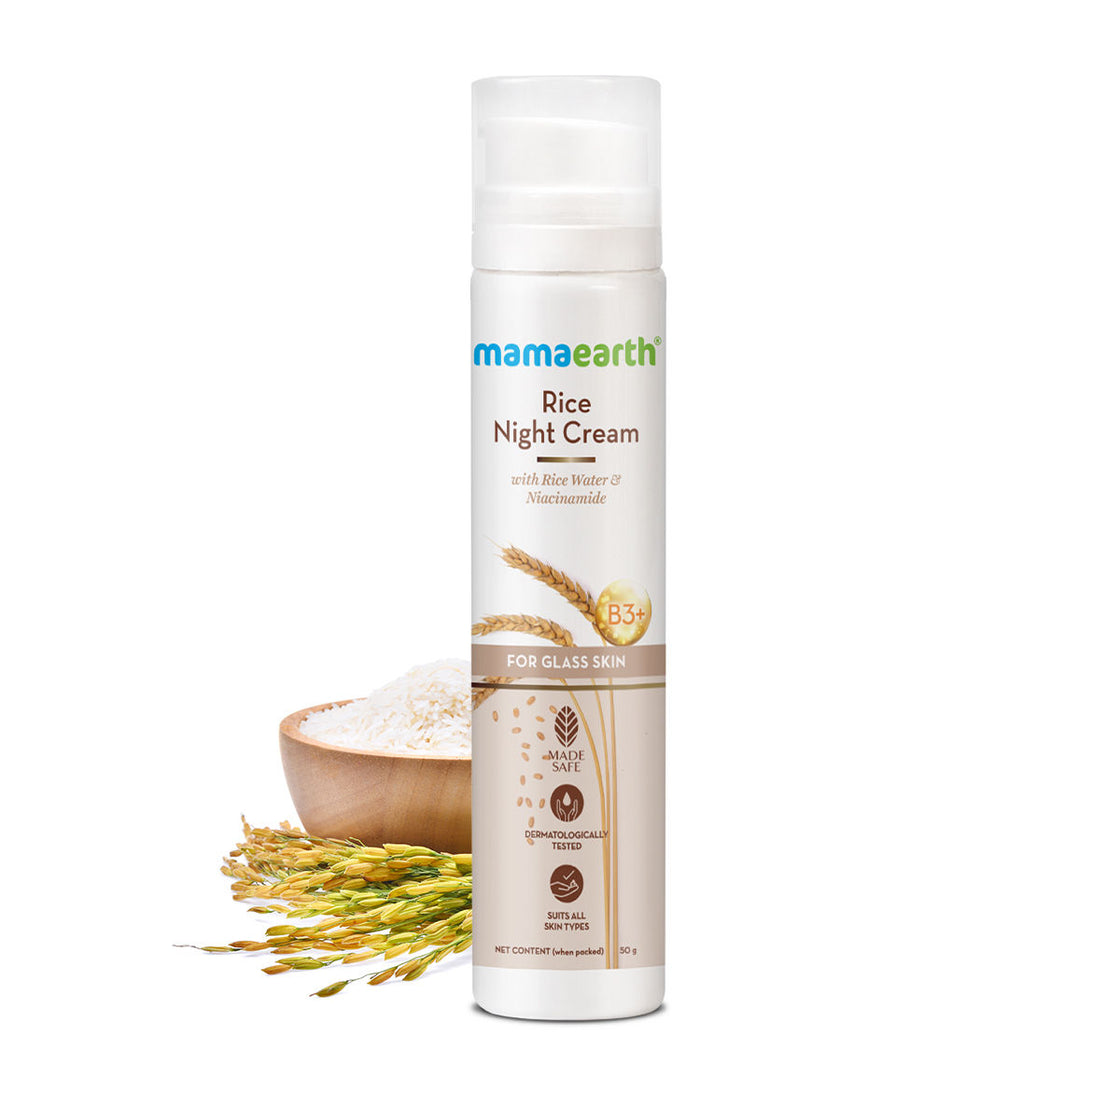 Mamaearth Rice Night Cream For Clear Skin With Rice Water & Niacinamide For Glass Skin